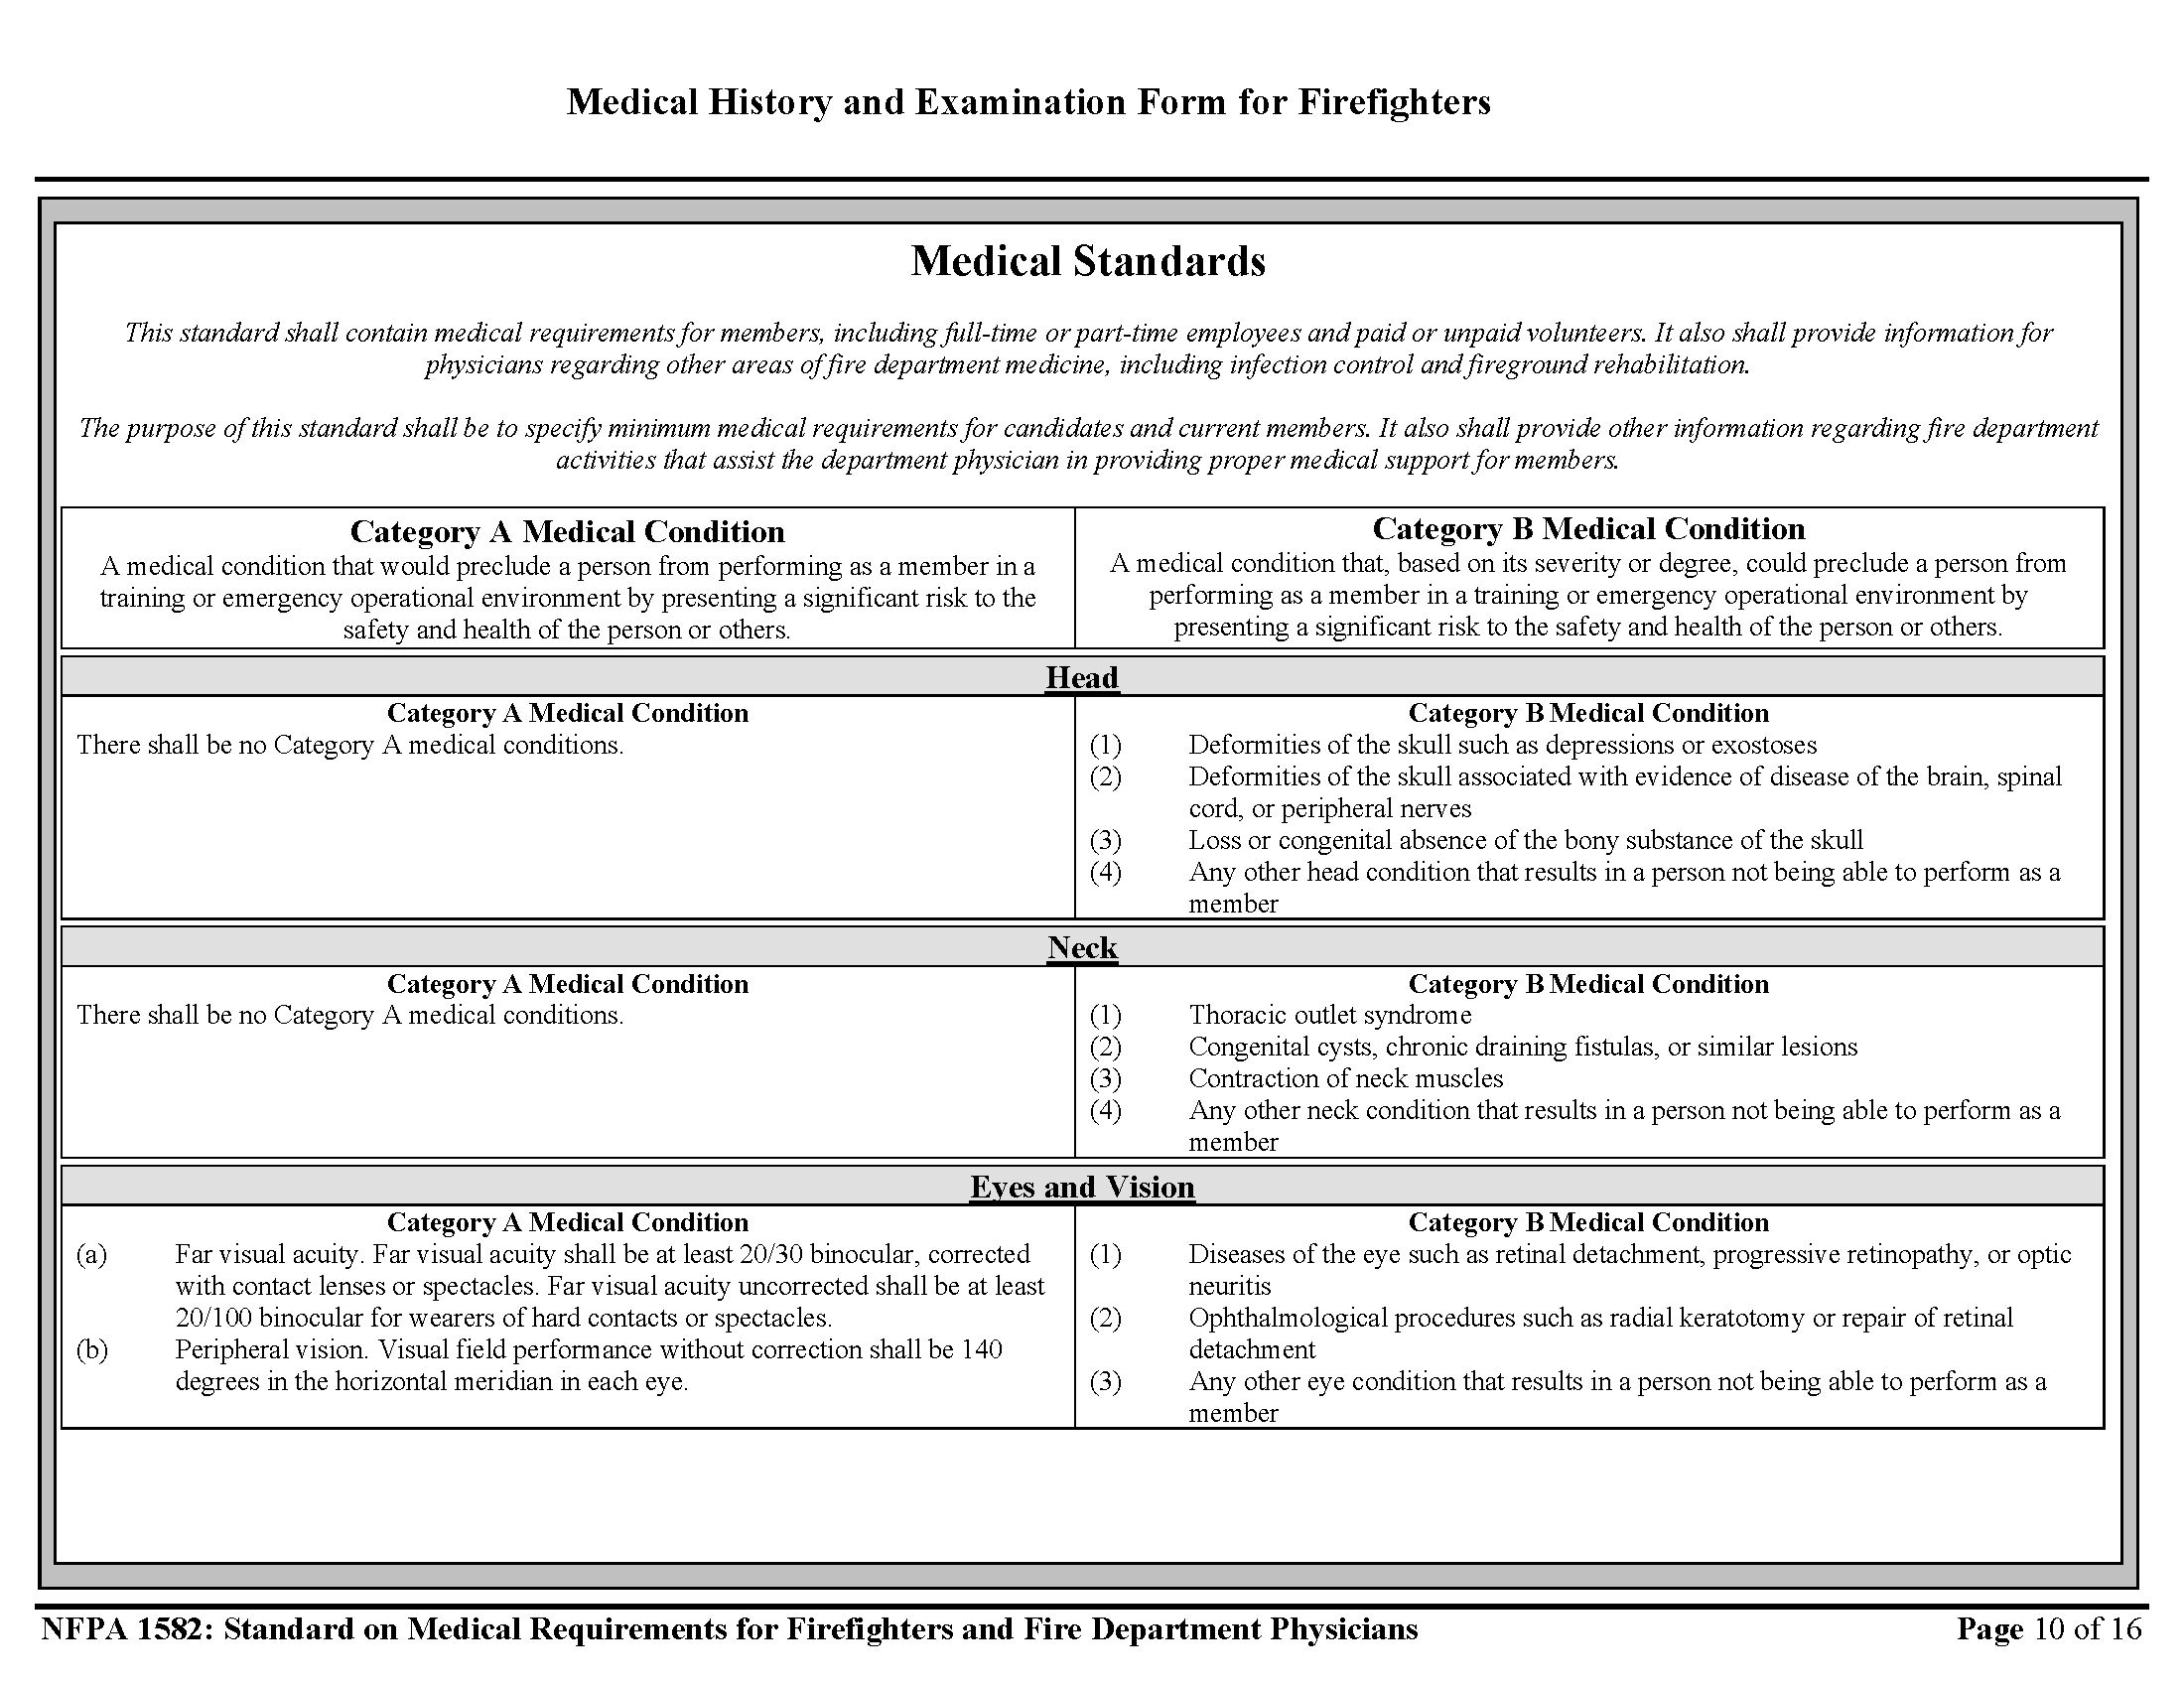 NFPA FORM 1582 FIREFIGHTER PHYSICAL Brown Clermont Adult Career 